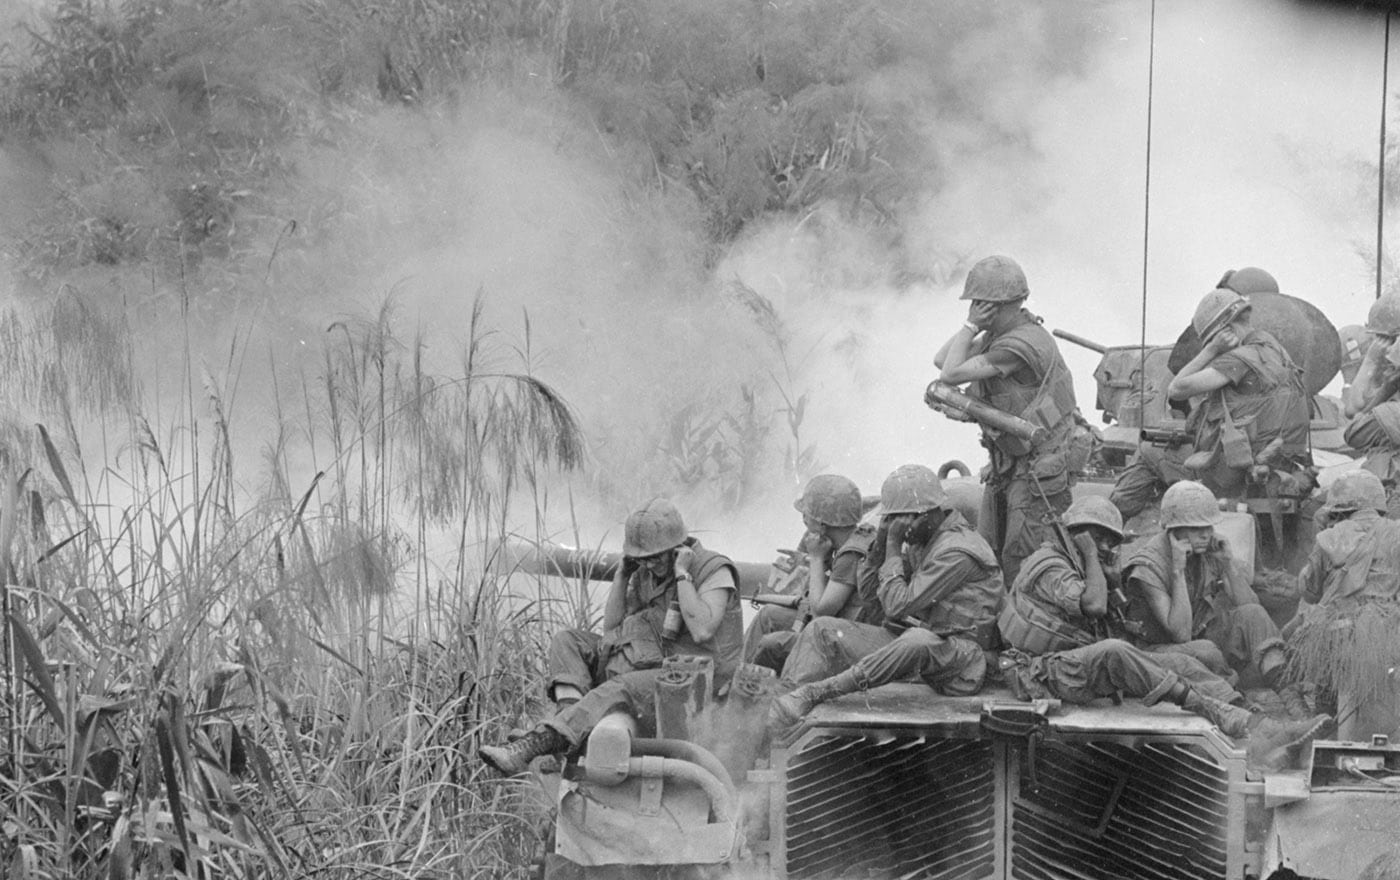 m48 patton tank engages a target in the vietnam war while marines ride on it